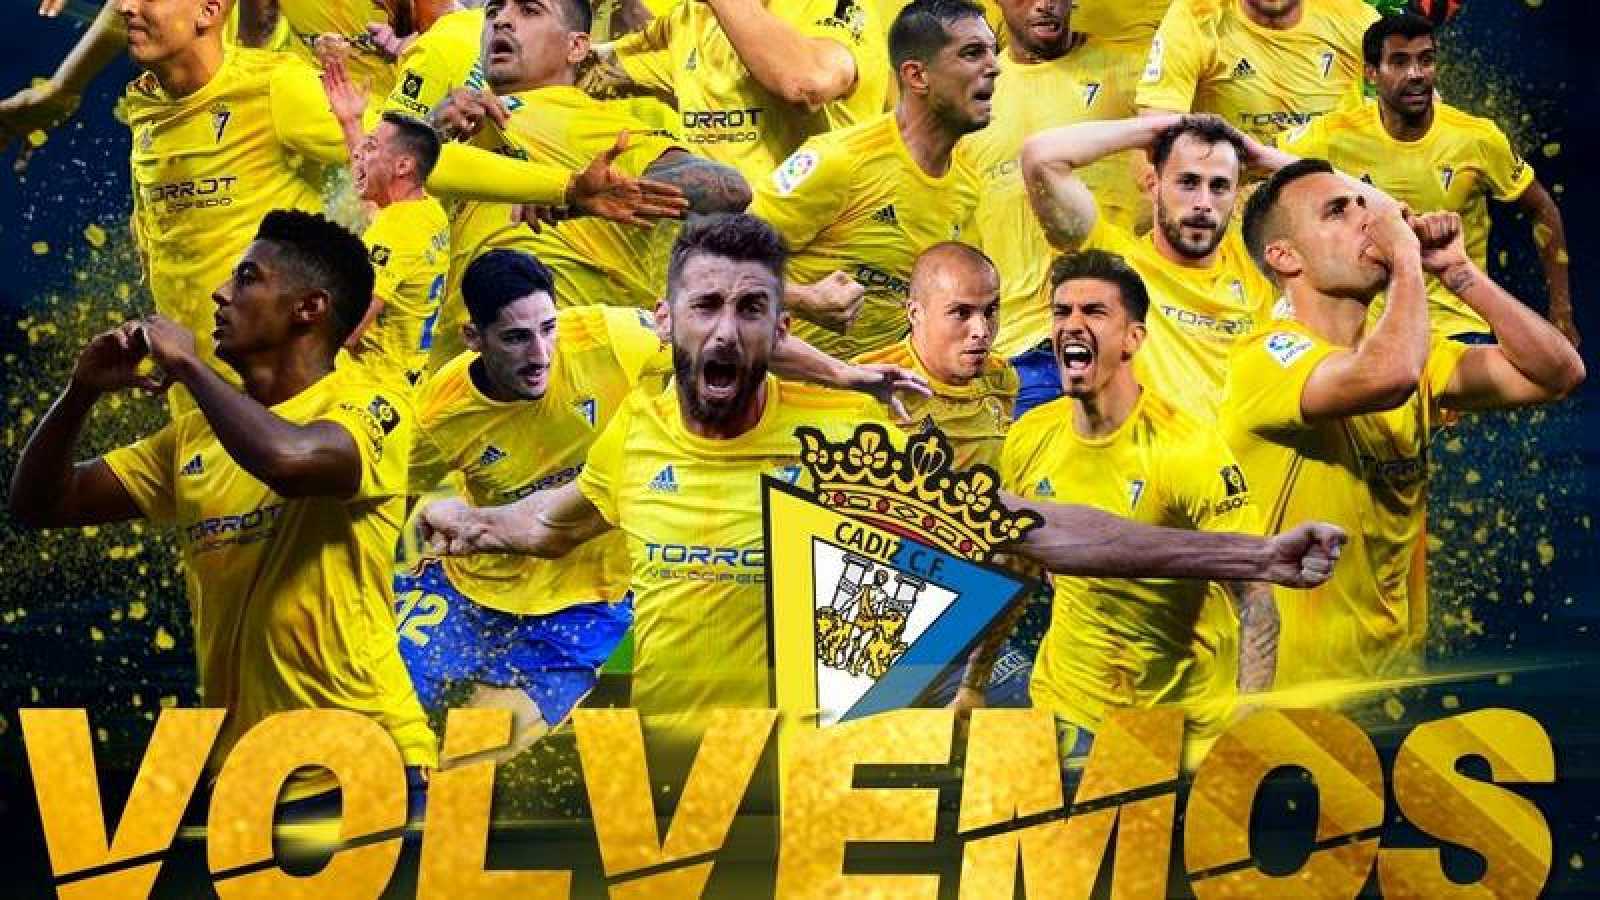 Cadiz Is Promoted to First League Football after Real Zaragoza Loses to Real Oviedo